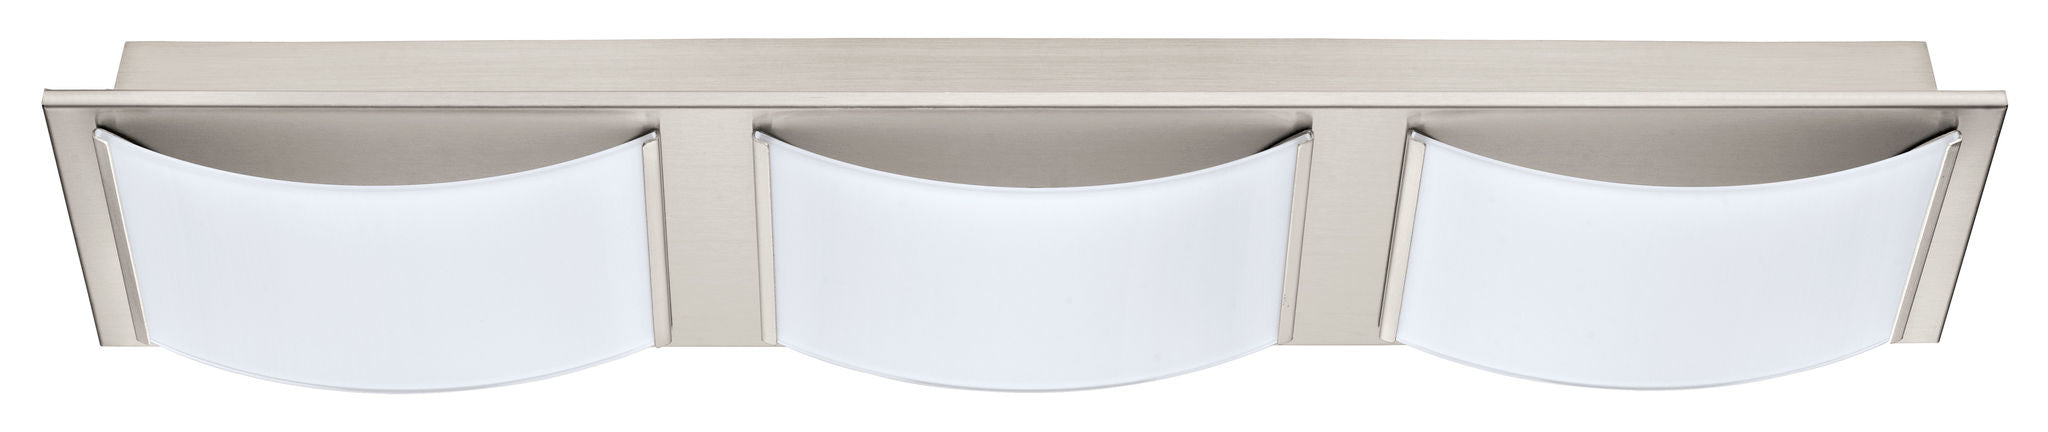 Wasao Flush mount Stainless steel INTEGRATED LED - 201469A | EGLO